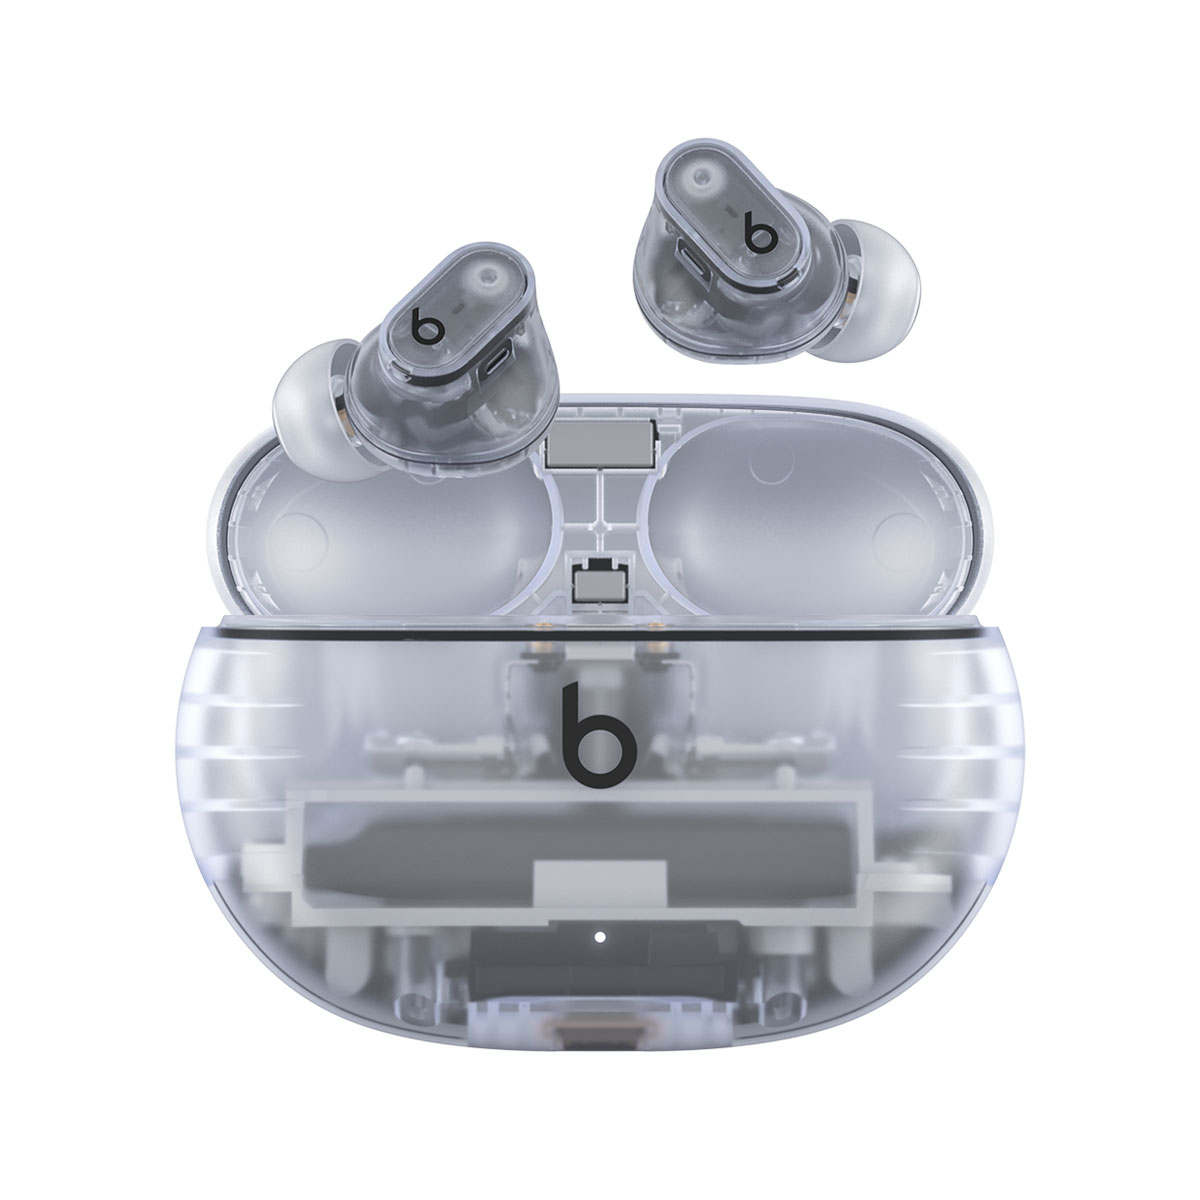 Beats Studio Buds + True Wireless Noise Cancelling Earbuds in Transparent, with Beats logo, above convenient charging case.